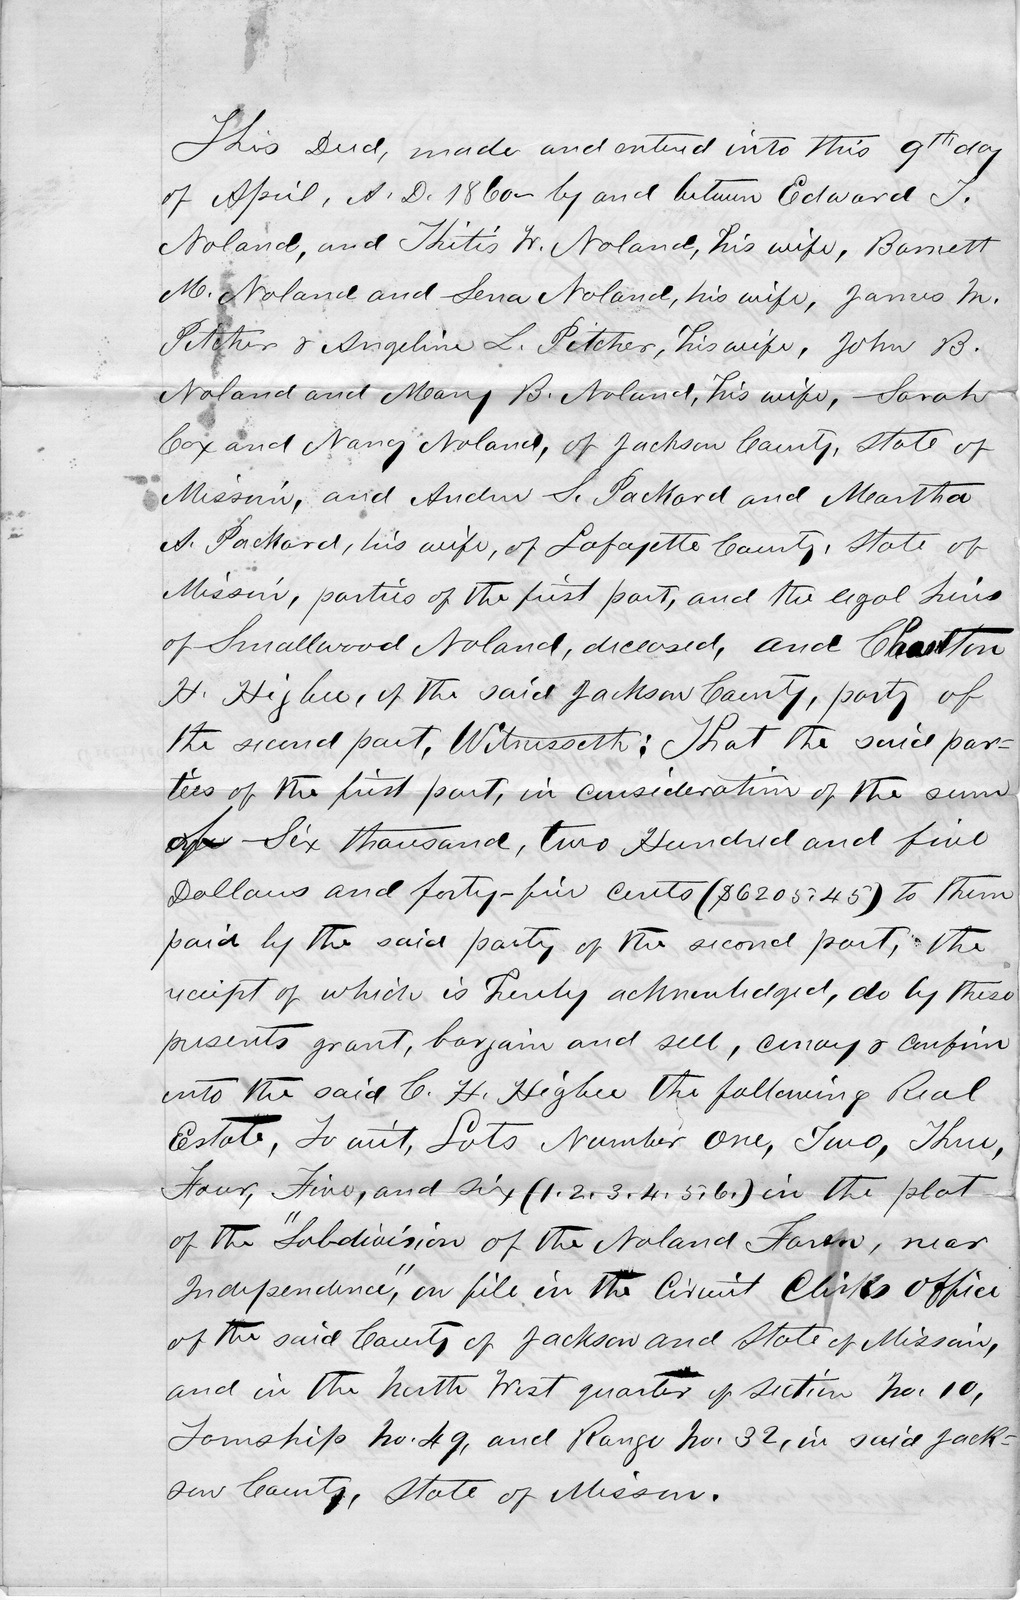 Deed from Edward T. Noland and Thetis H. Noland et al. to Charlton H. Higbee